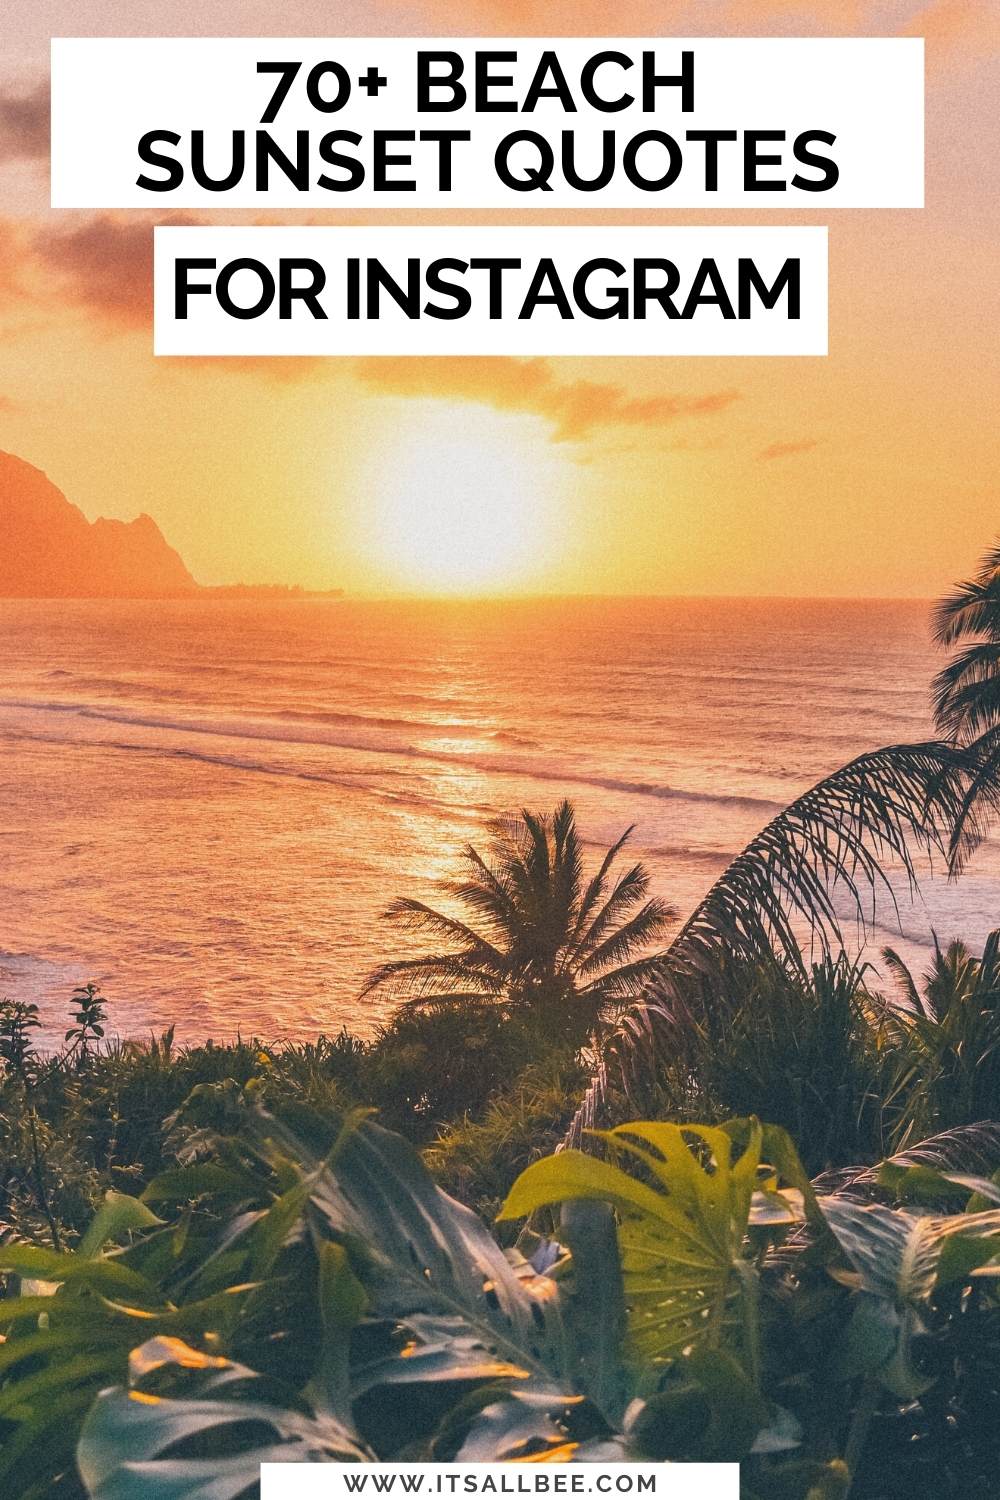 Beach 70+ Sunset Quotes For Instagram